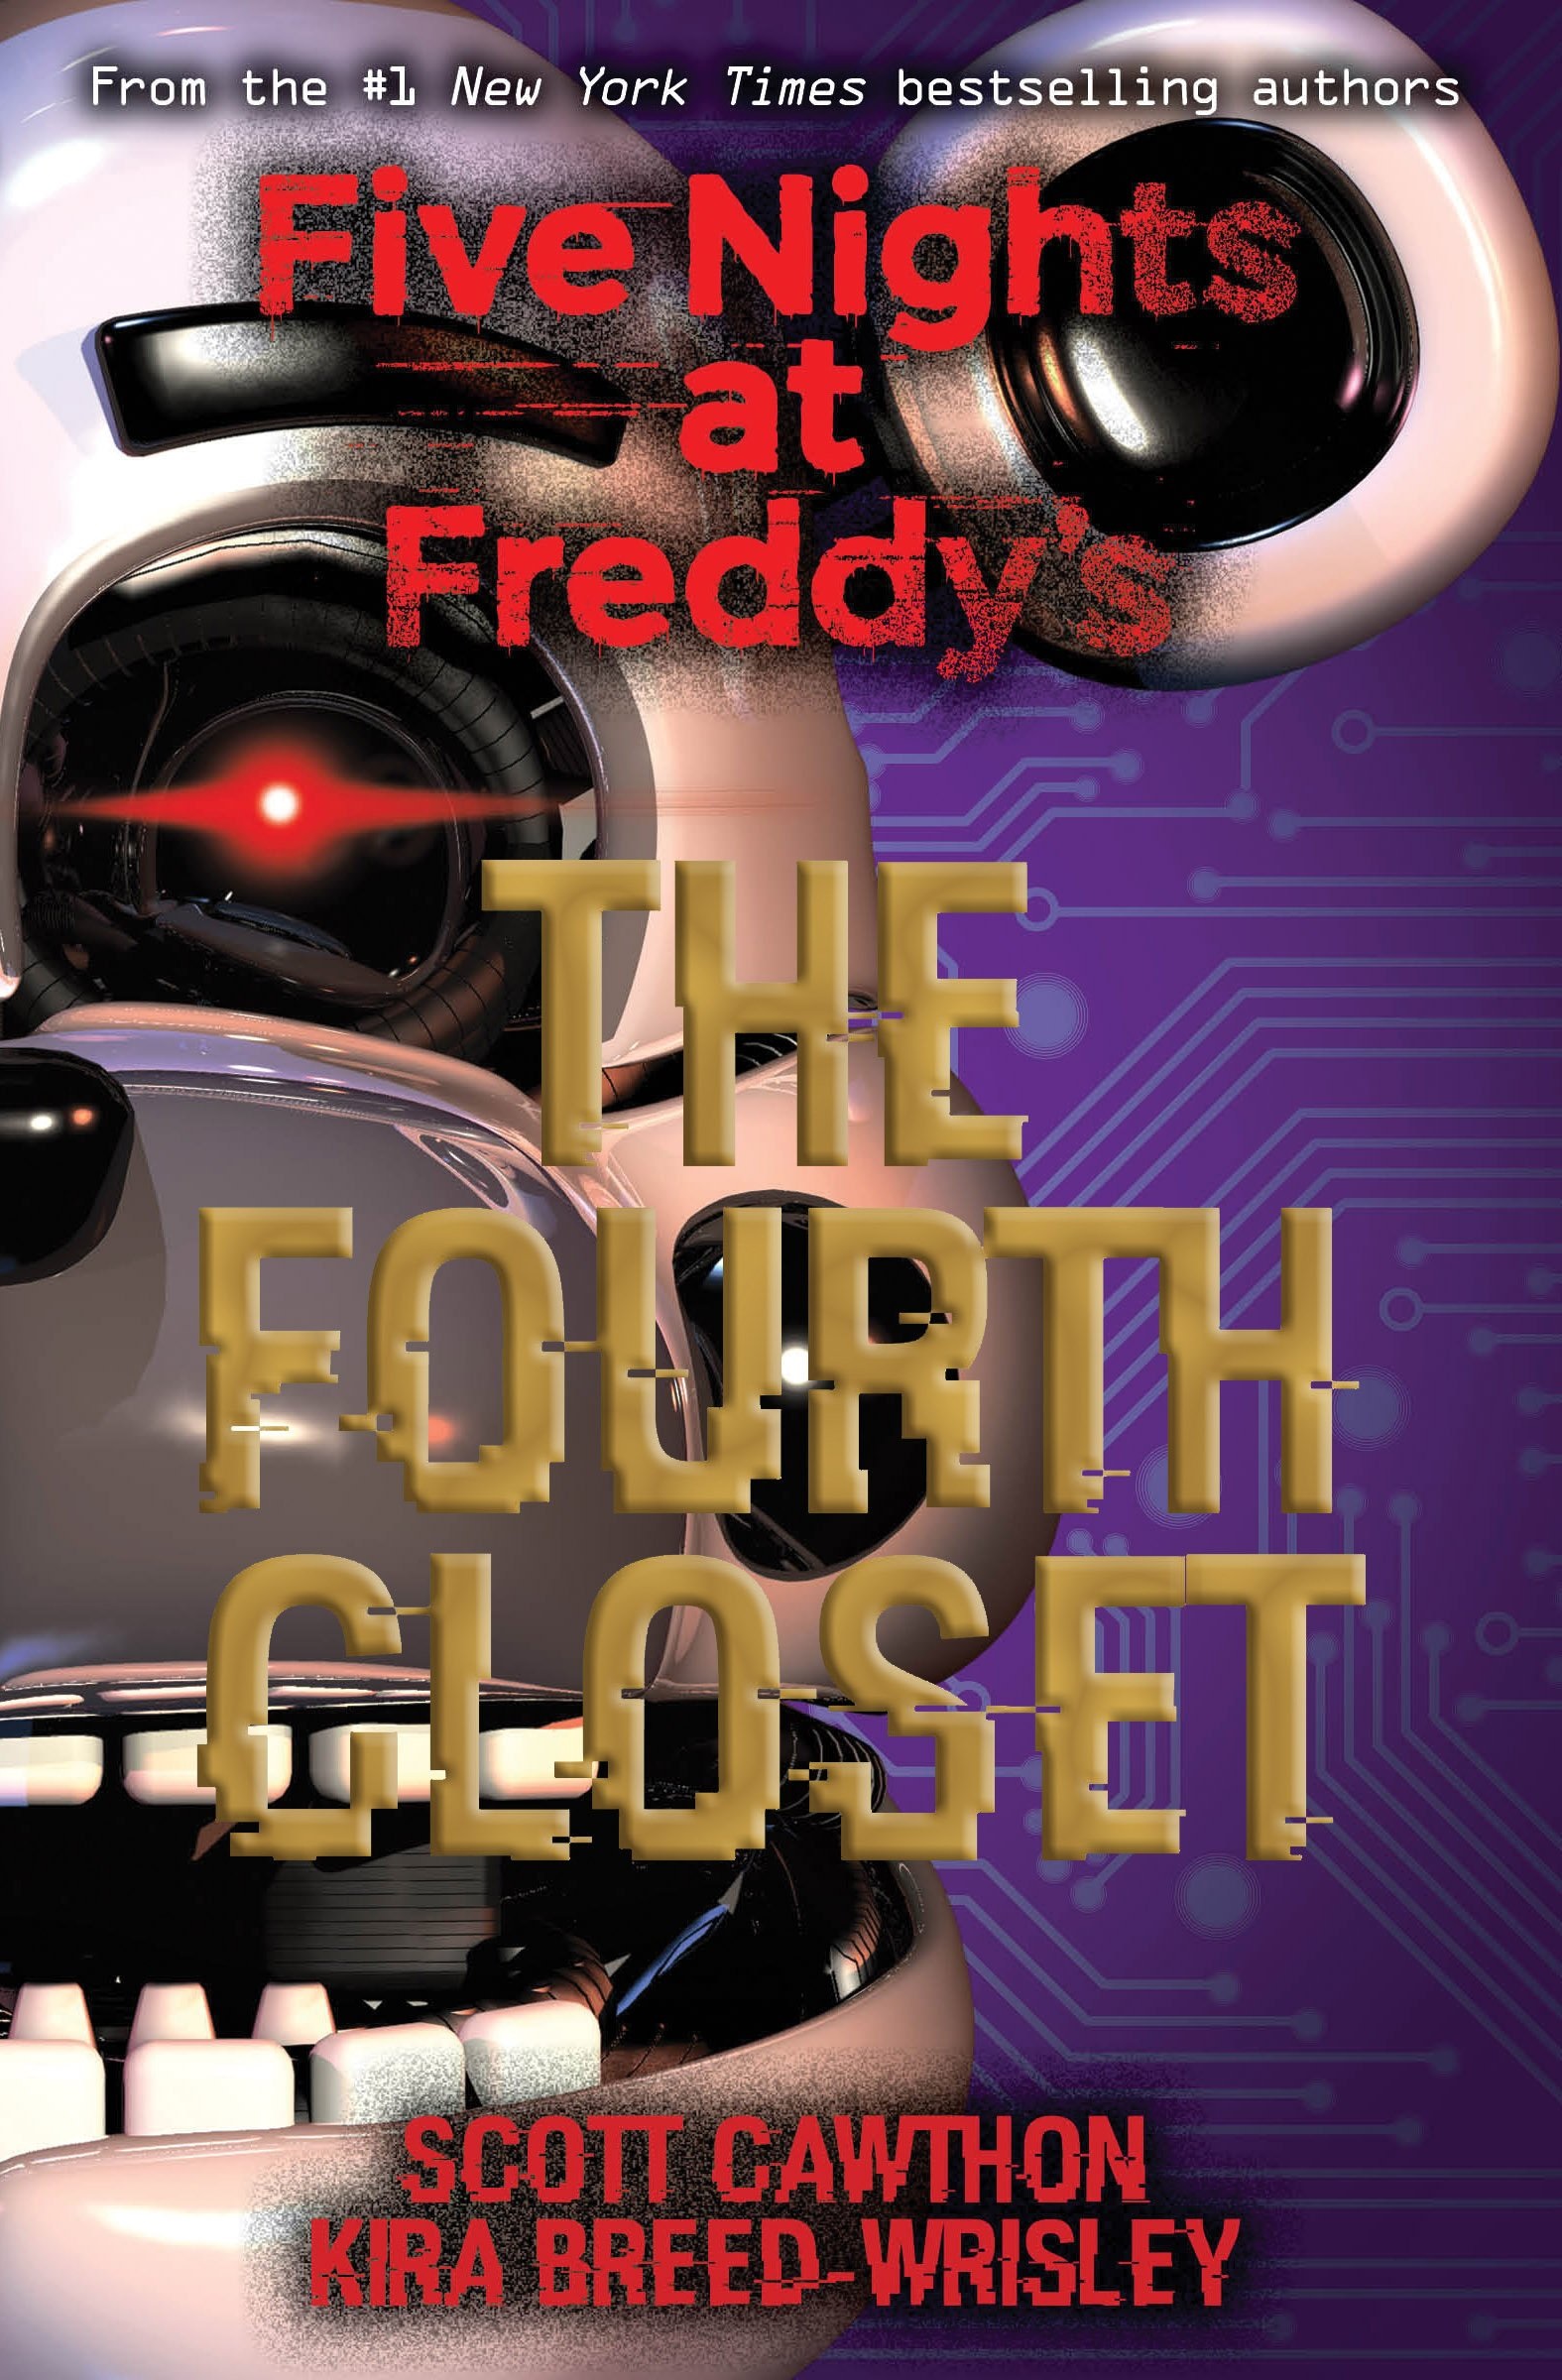 fellowes jessica the mitford murders Five Nights at Freddy's. The Fourth Closet